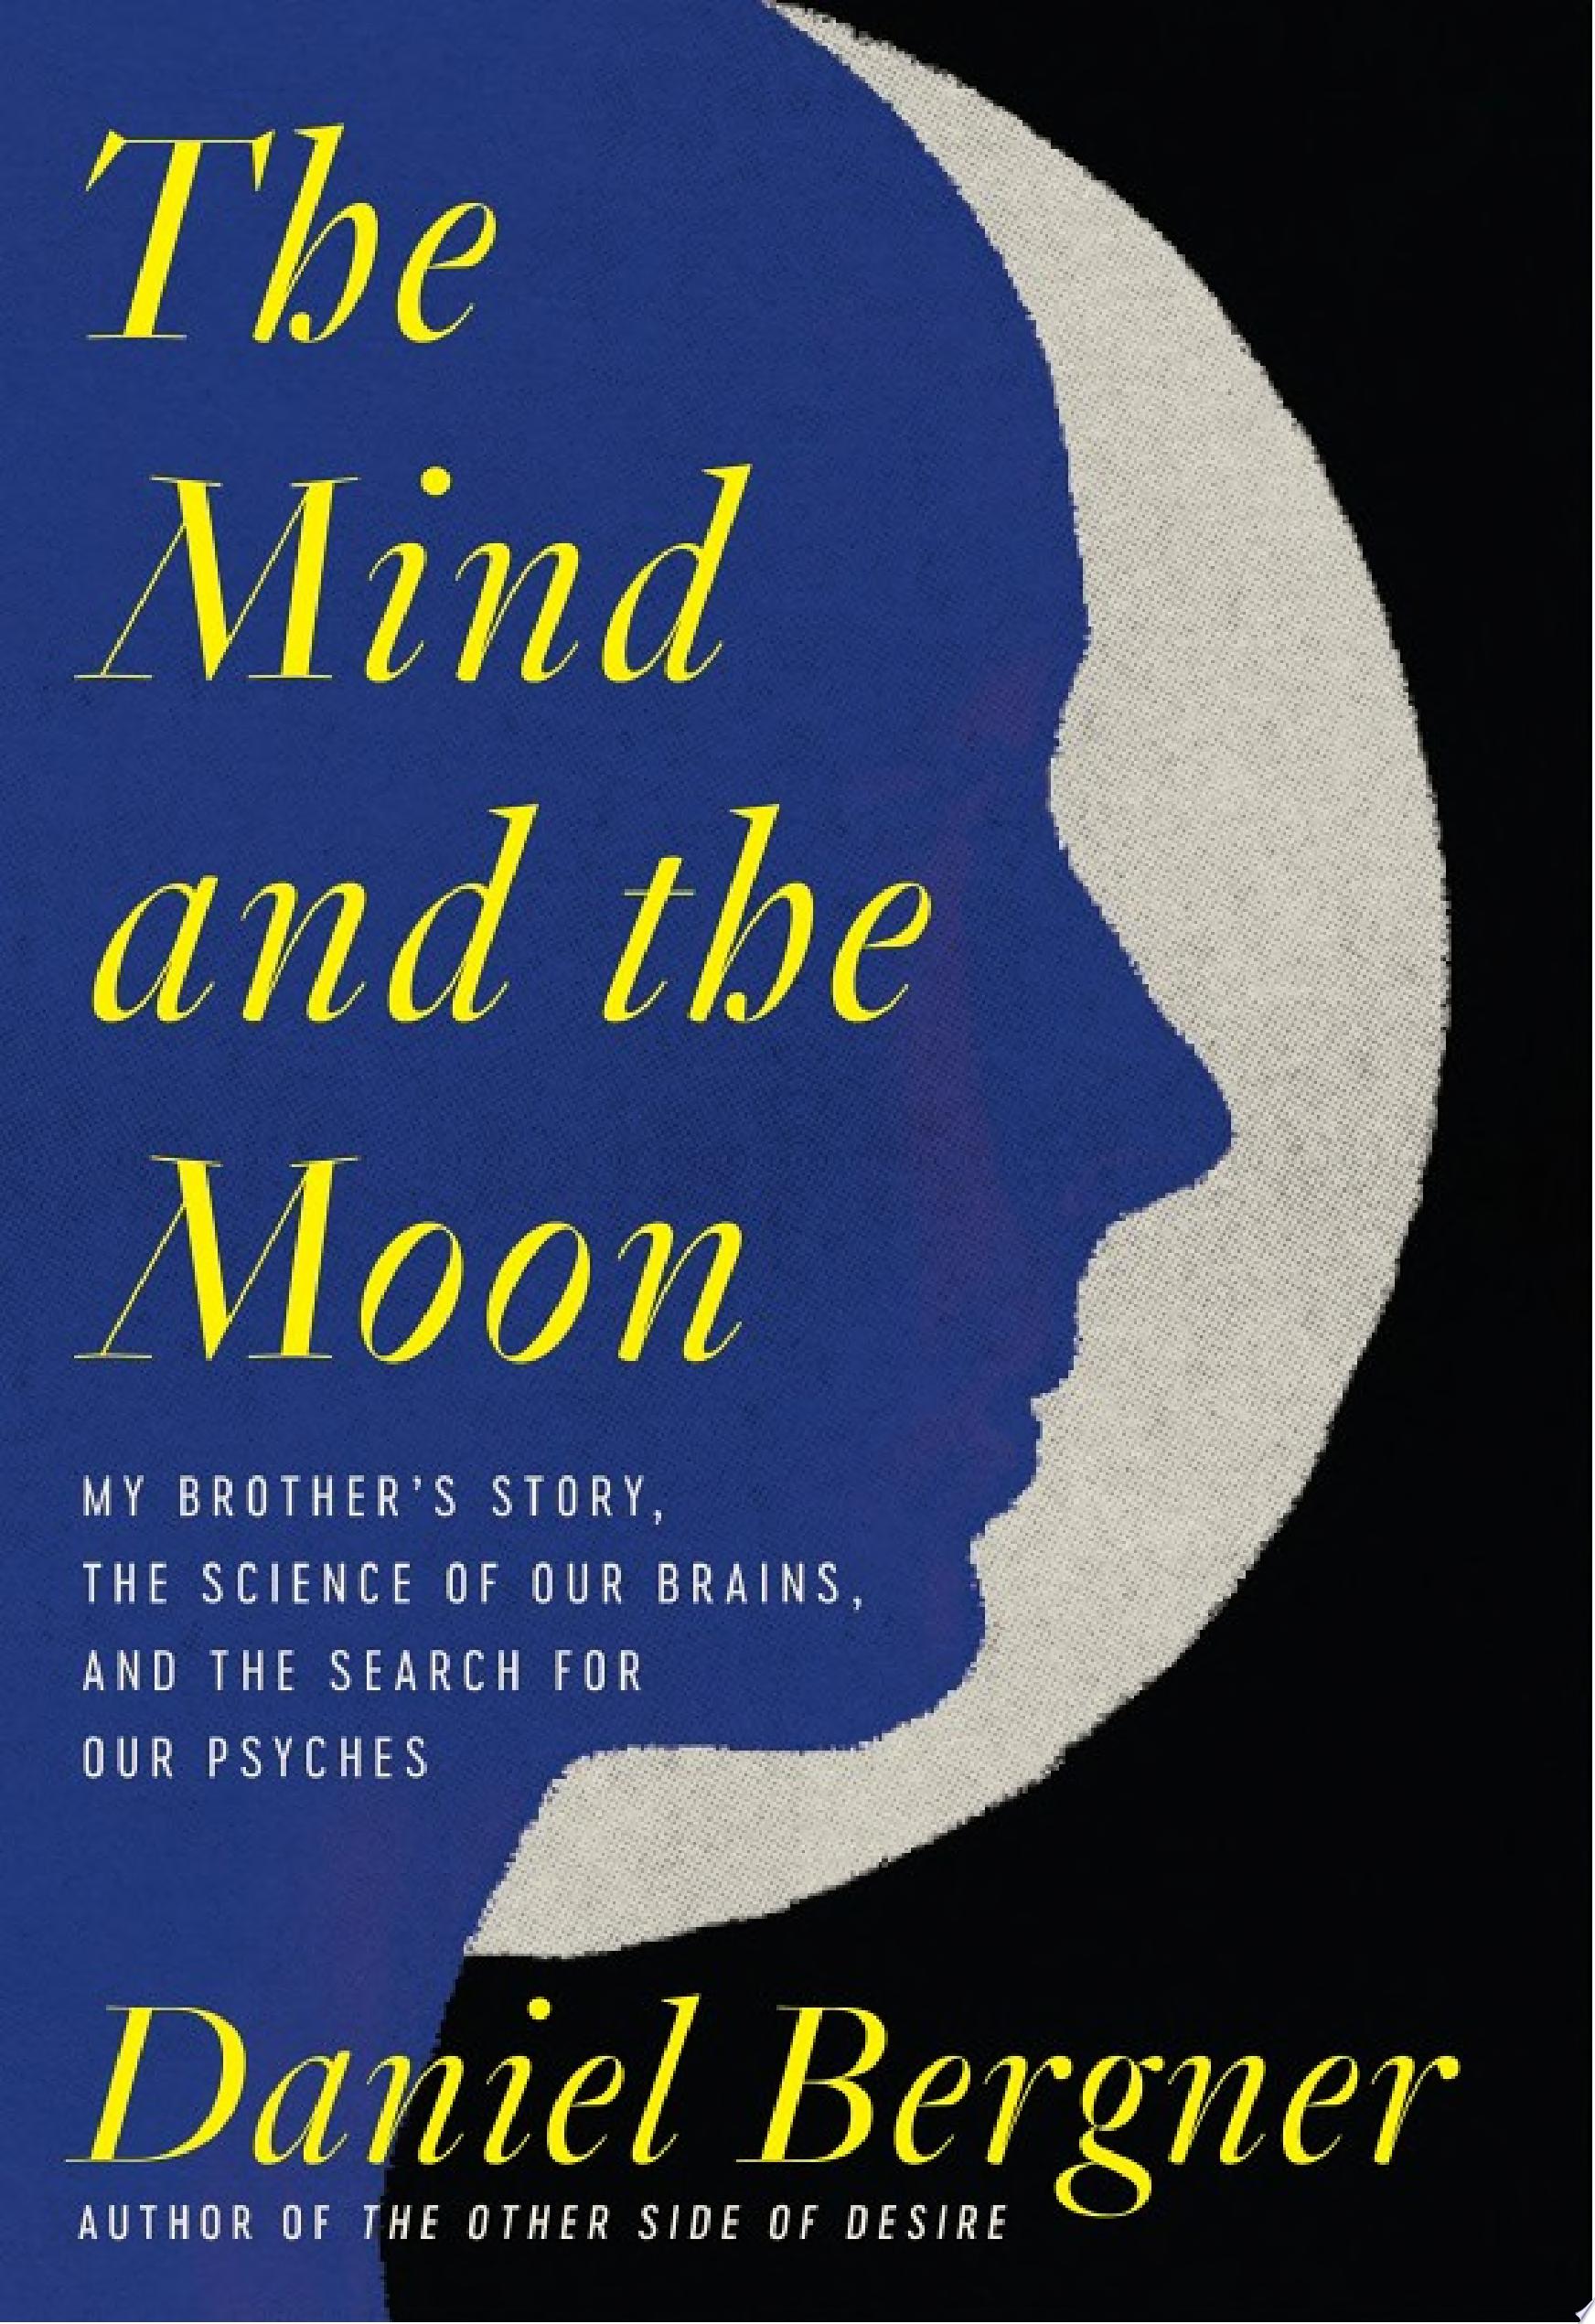 Image for "The Mind and the Moon"